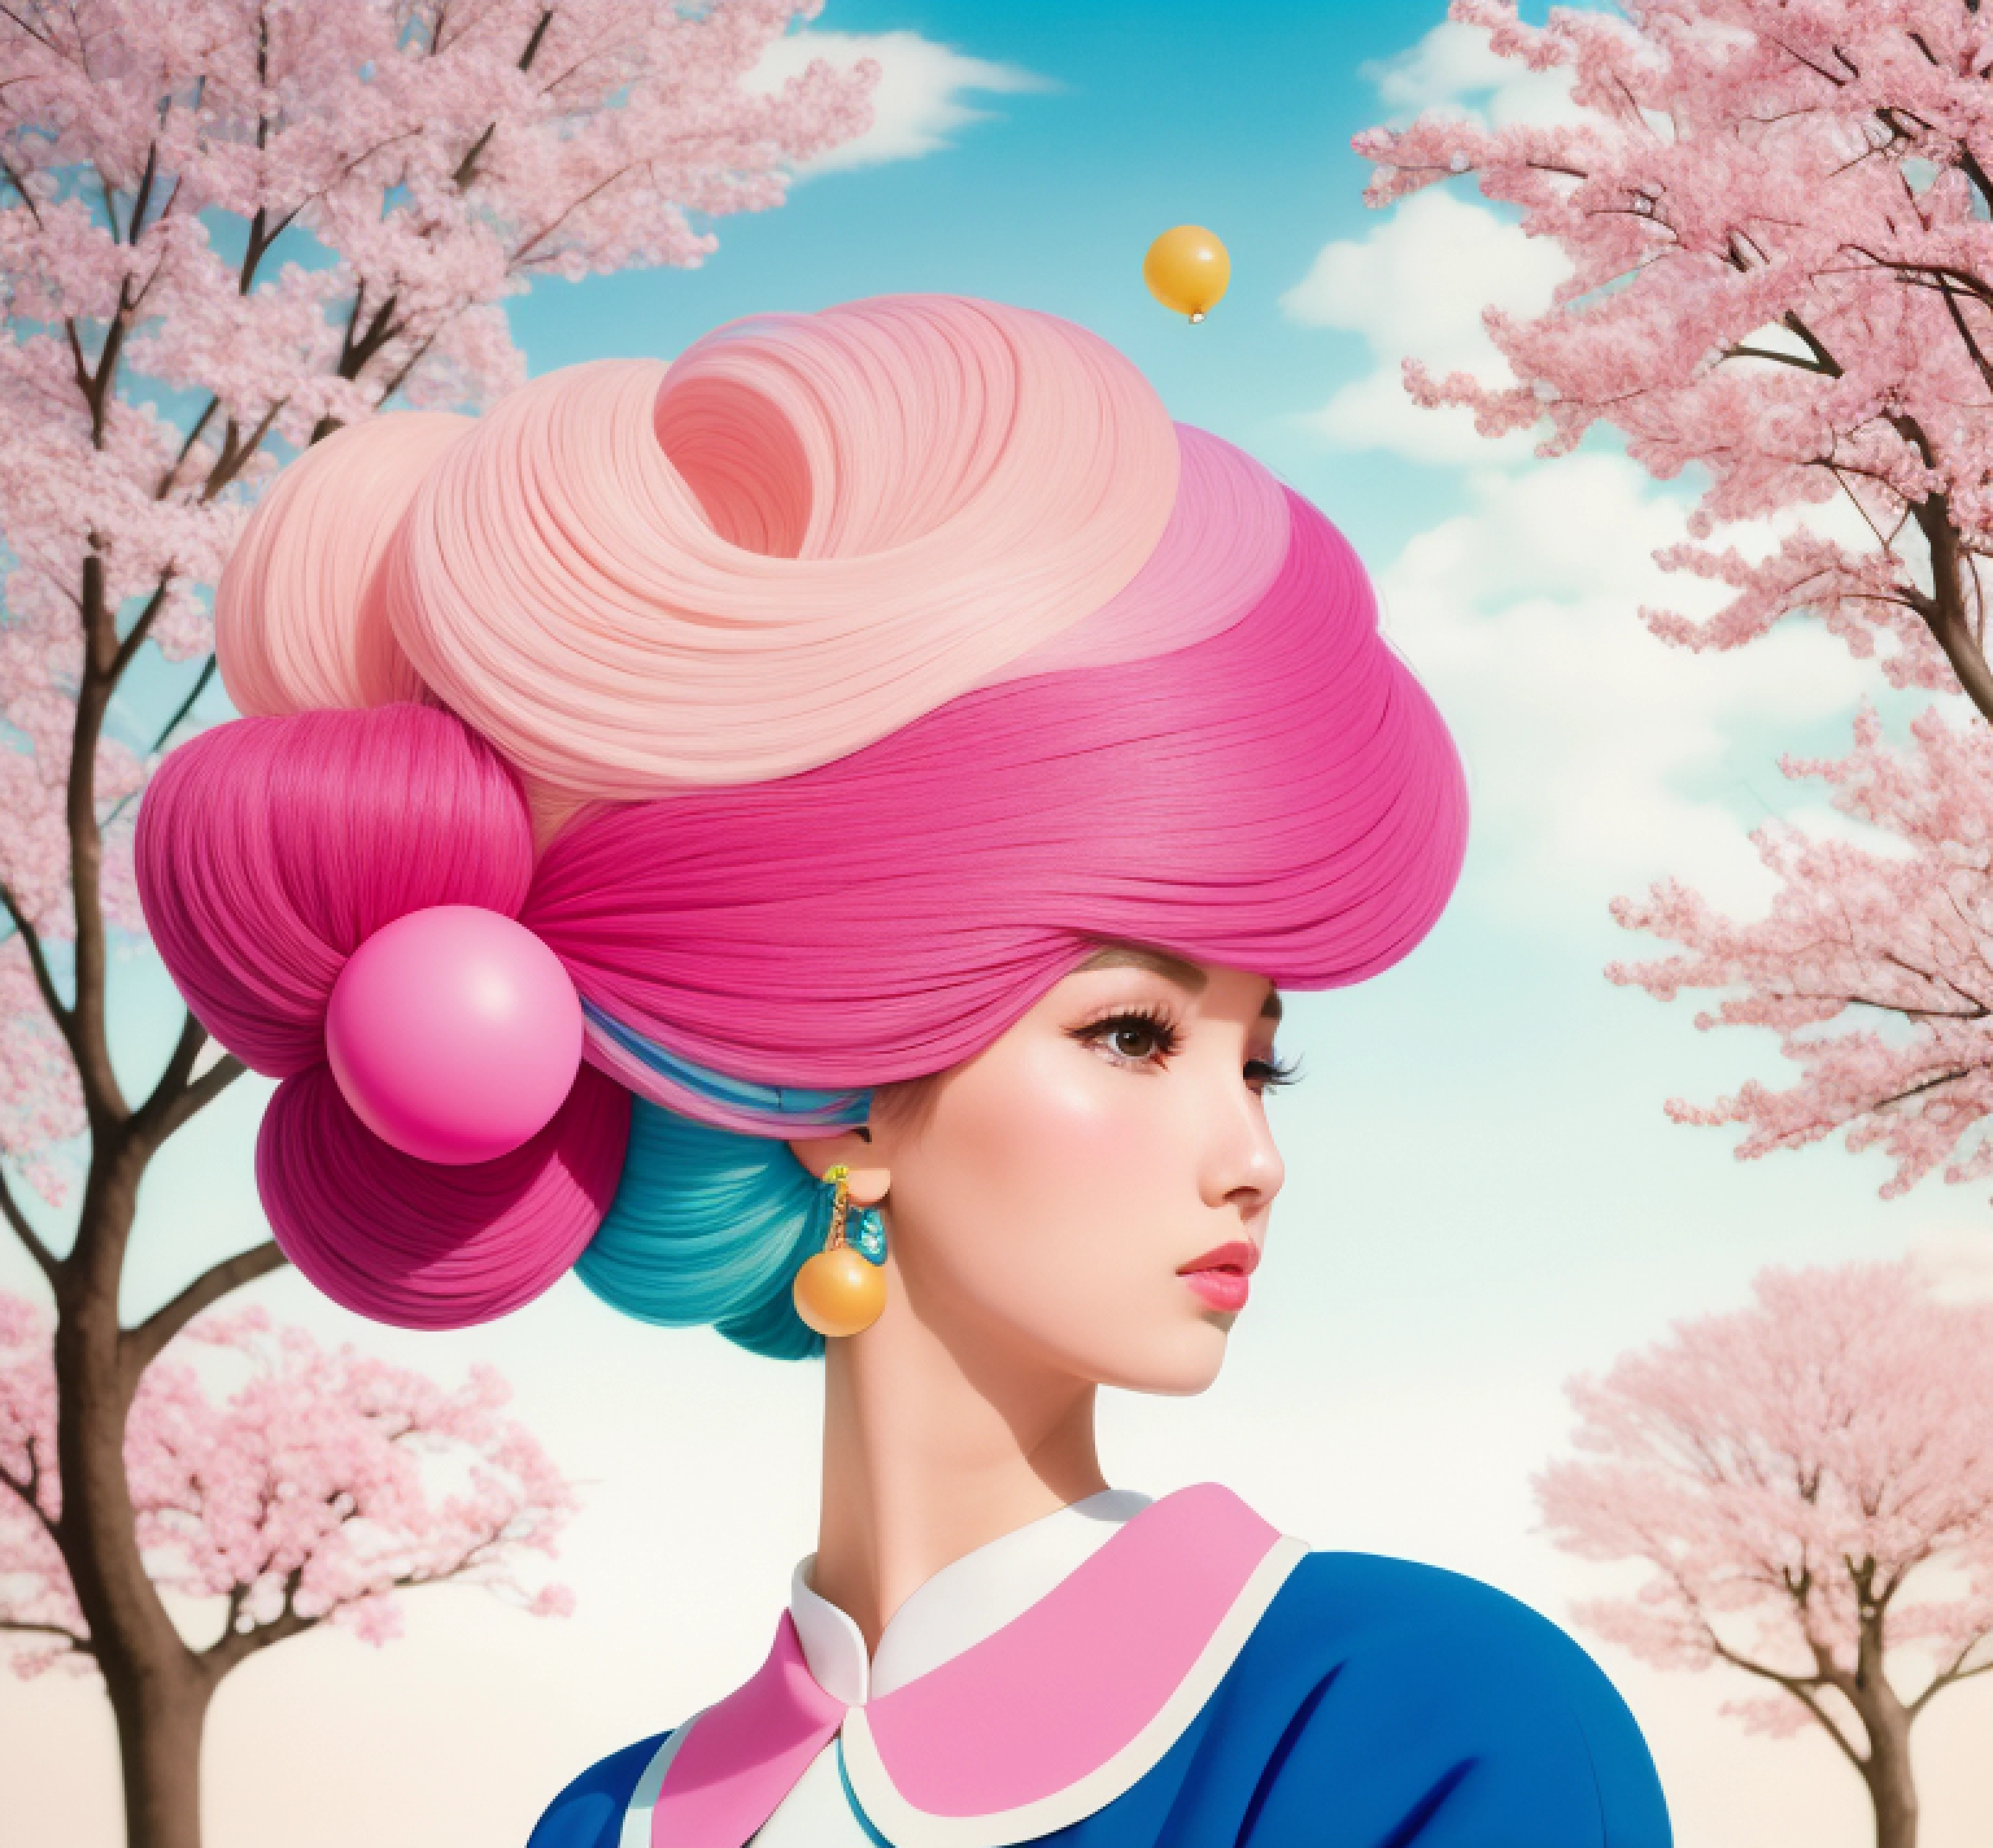 there is a painting of a woman with a tree on her head, branches sprouting from her head,  inspired by George barbier, tara mcpherson, brittney lee, blowing bubblegum, lisa frank & sho murase, by Shinoda Toko, inspired by Hsiao-Ron Cheng, japanese pop surrealism, colorful illustration, colorfull illustration, fantasy pop art, inspired by Victor Mosquera, bubblegum